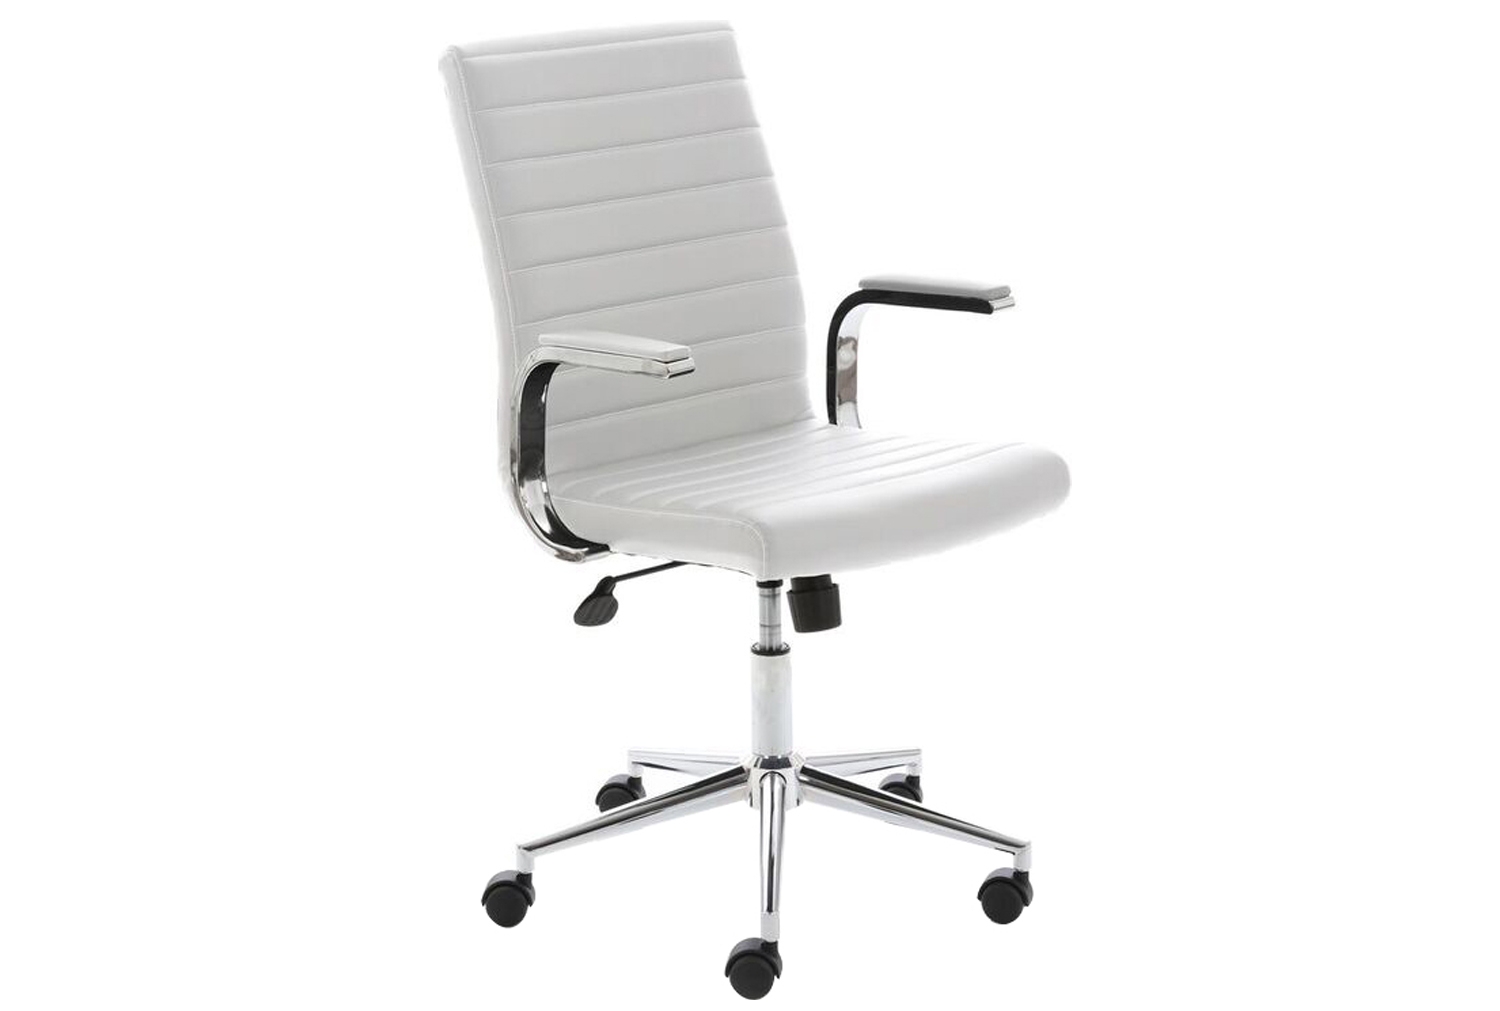 Wexford Executive Bonded Leather Office Chair (White)